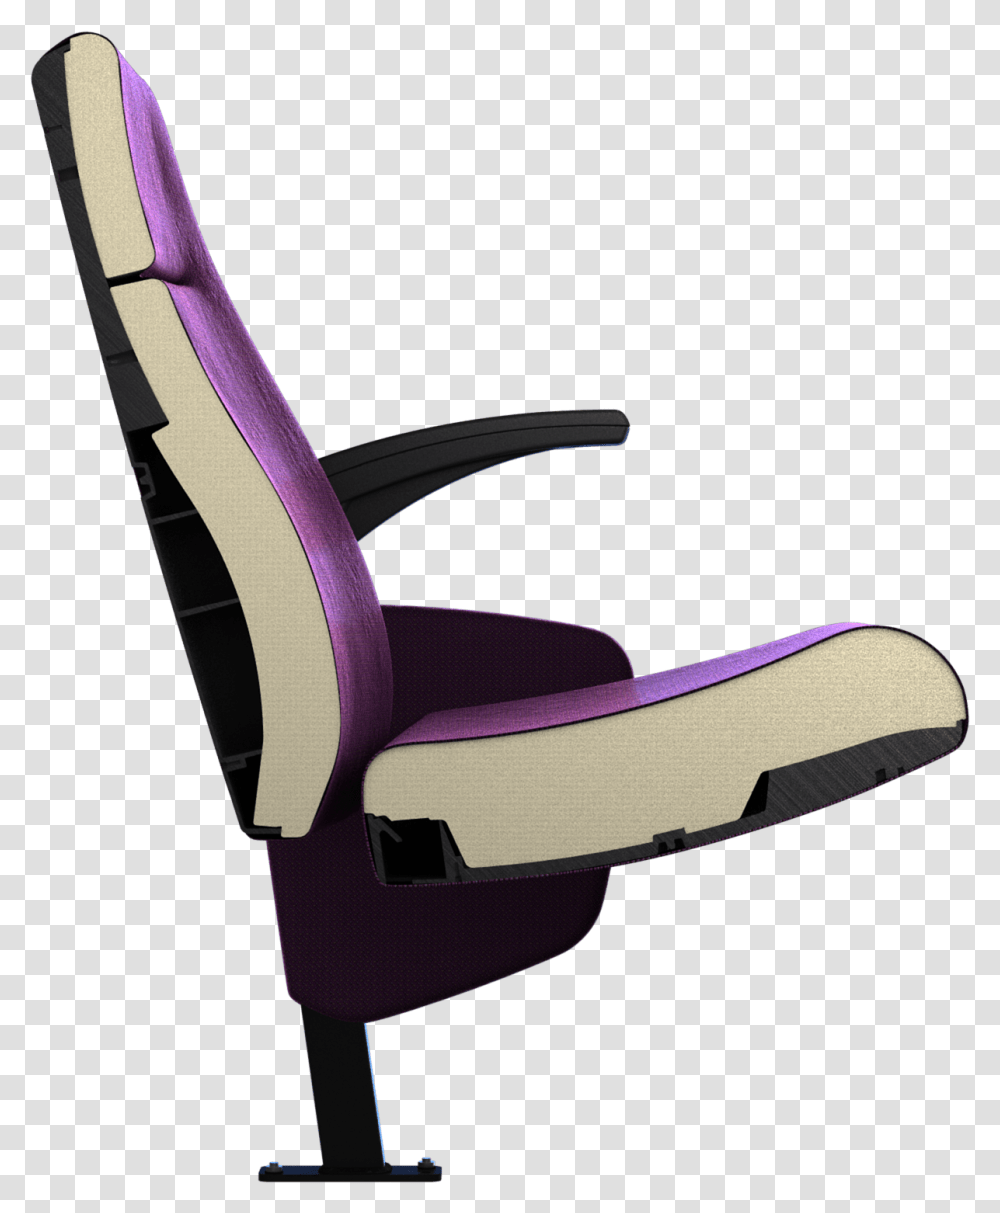 Pin On Visual Art And Design By Tim Parsons Auditorium Chair For Photoshop, Apparel, Footwear, Shoe Transparent Png